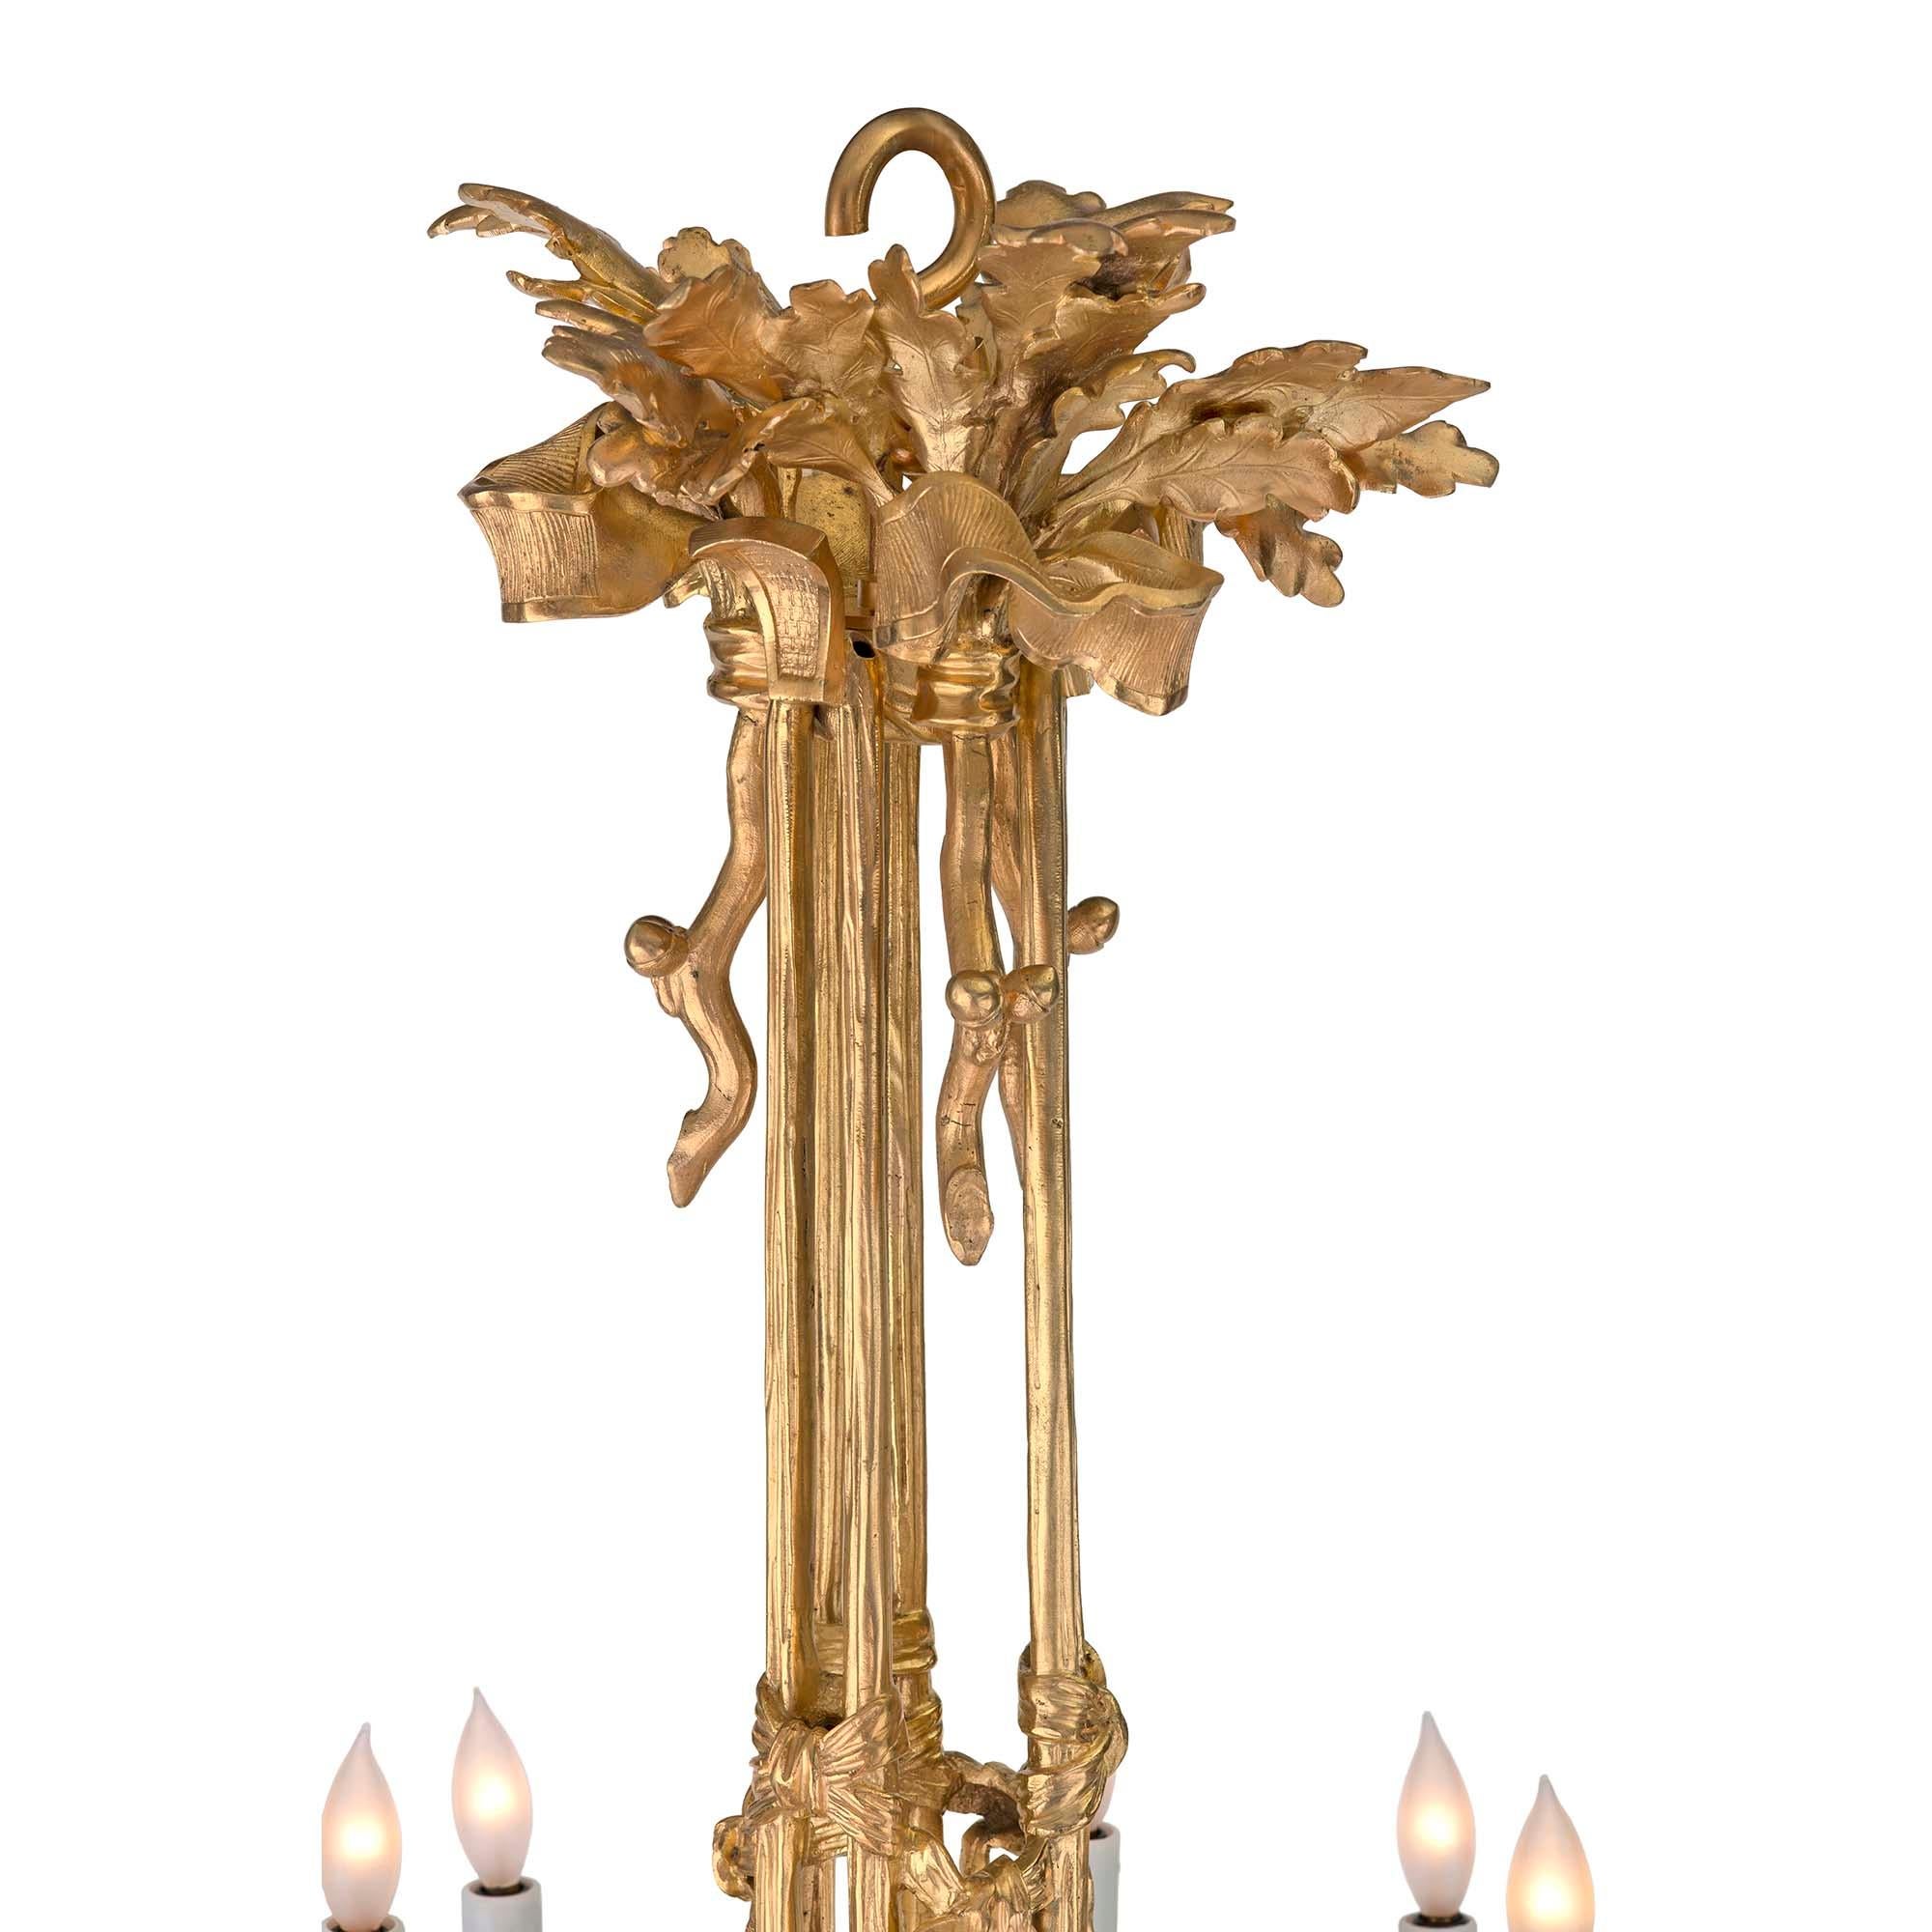 A spectacular French 19th century Louis XVI st. ormolu twelve light chandelier. At the base are tied tassels below impressive hoof designs. Centered are six impressive horn styled arms tied with ribbons interspersed with finely chased foliate